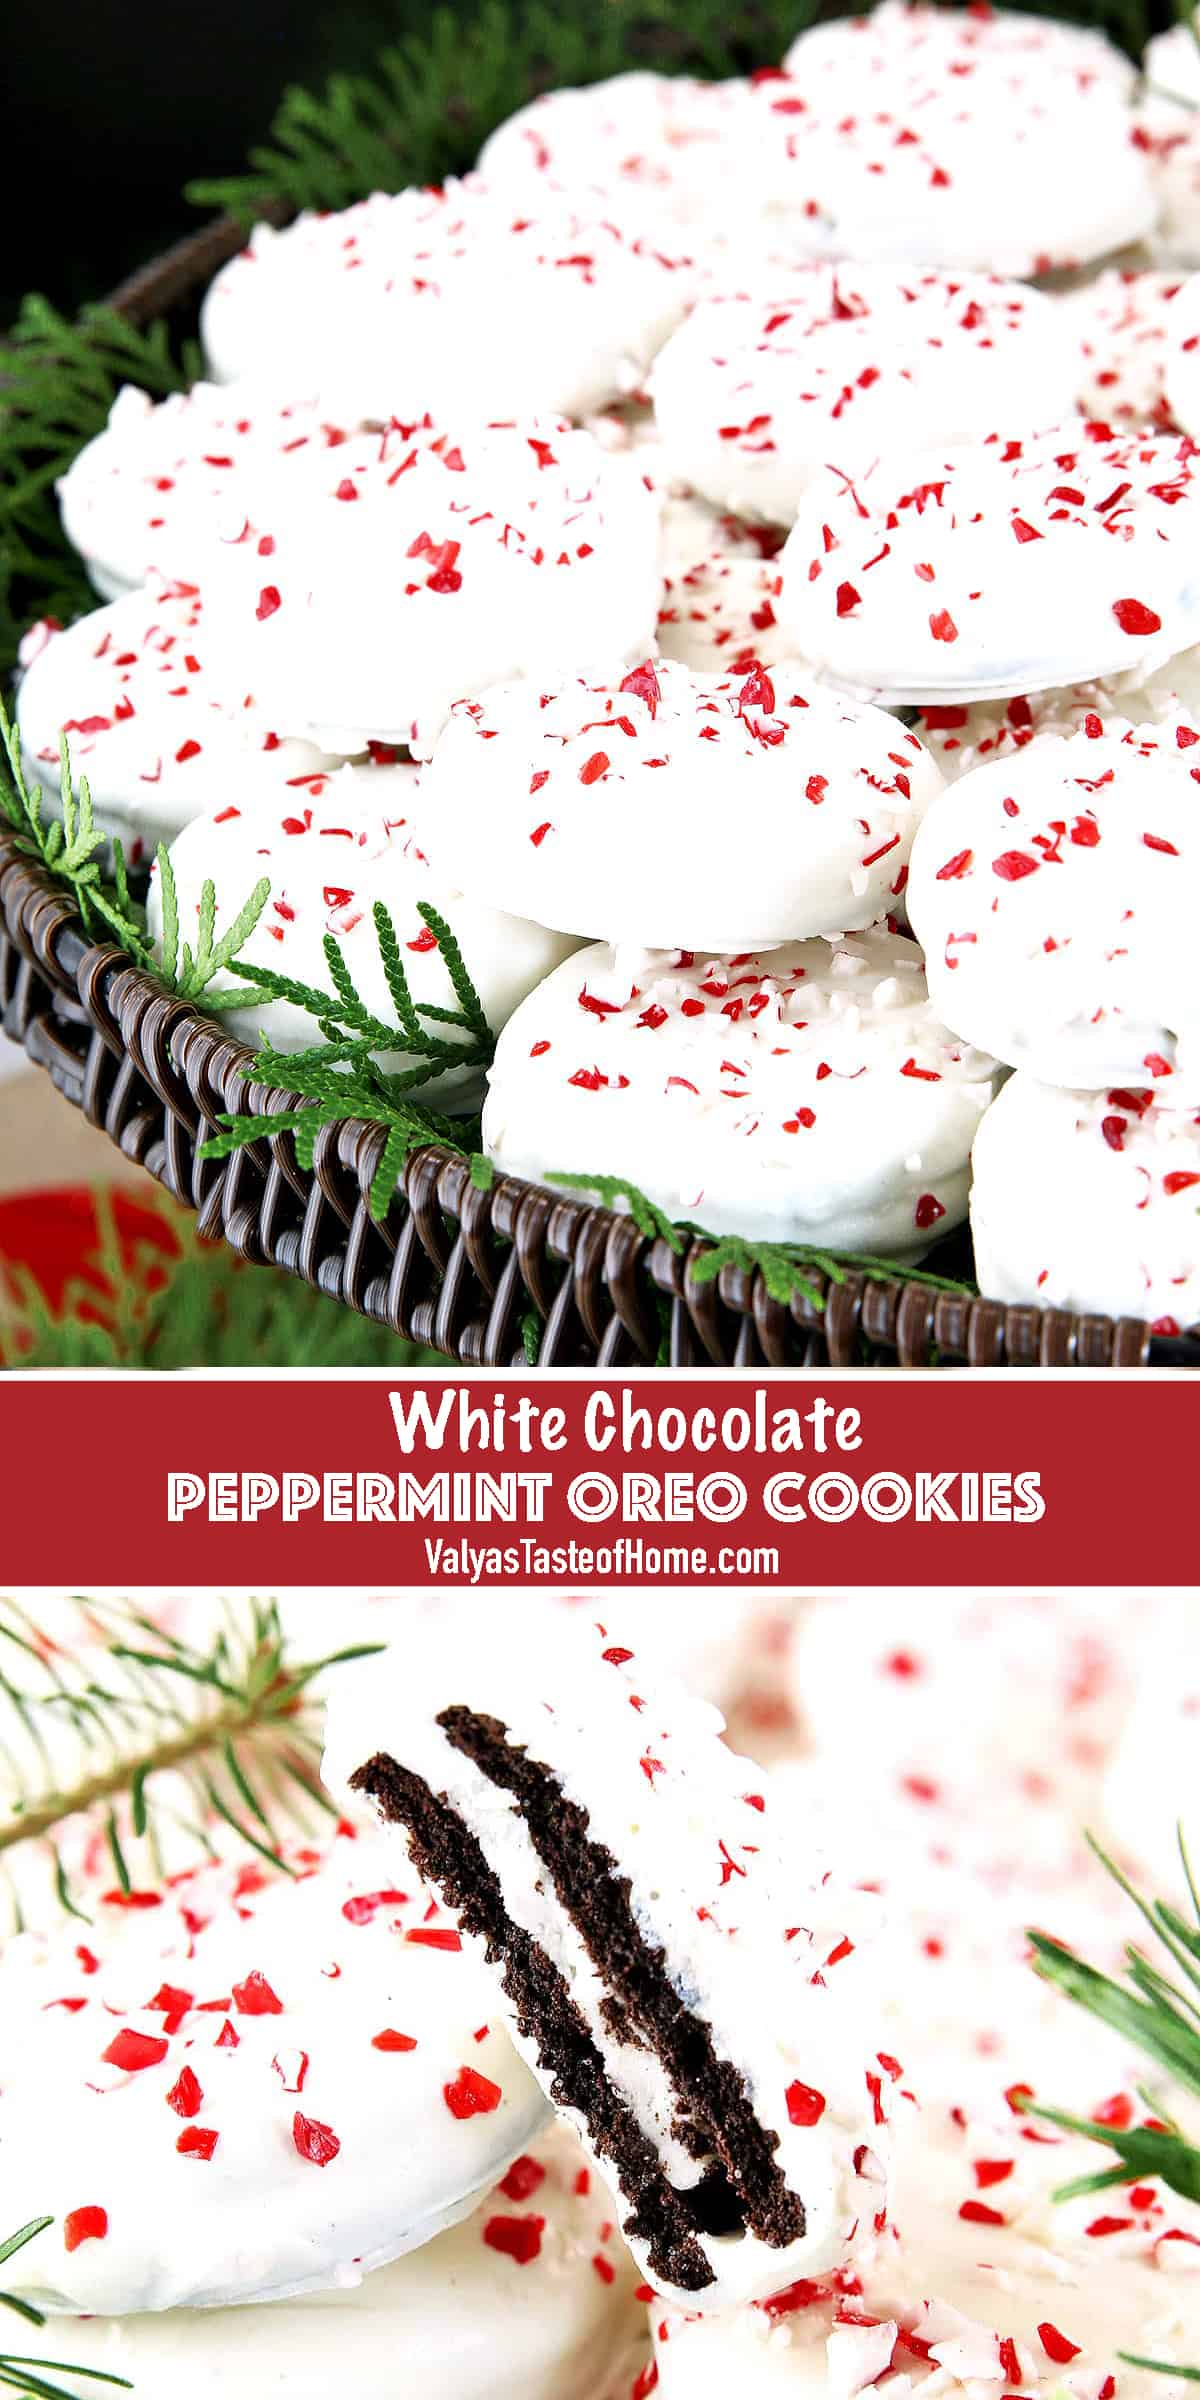 Oreo cookies dipped in white chocolate and sprinkled with crushed peppermint candies are festive, very attractive and beautiful display on a party tray. And kids have a lot of fun together.